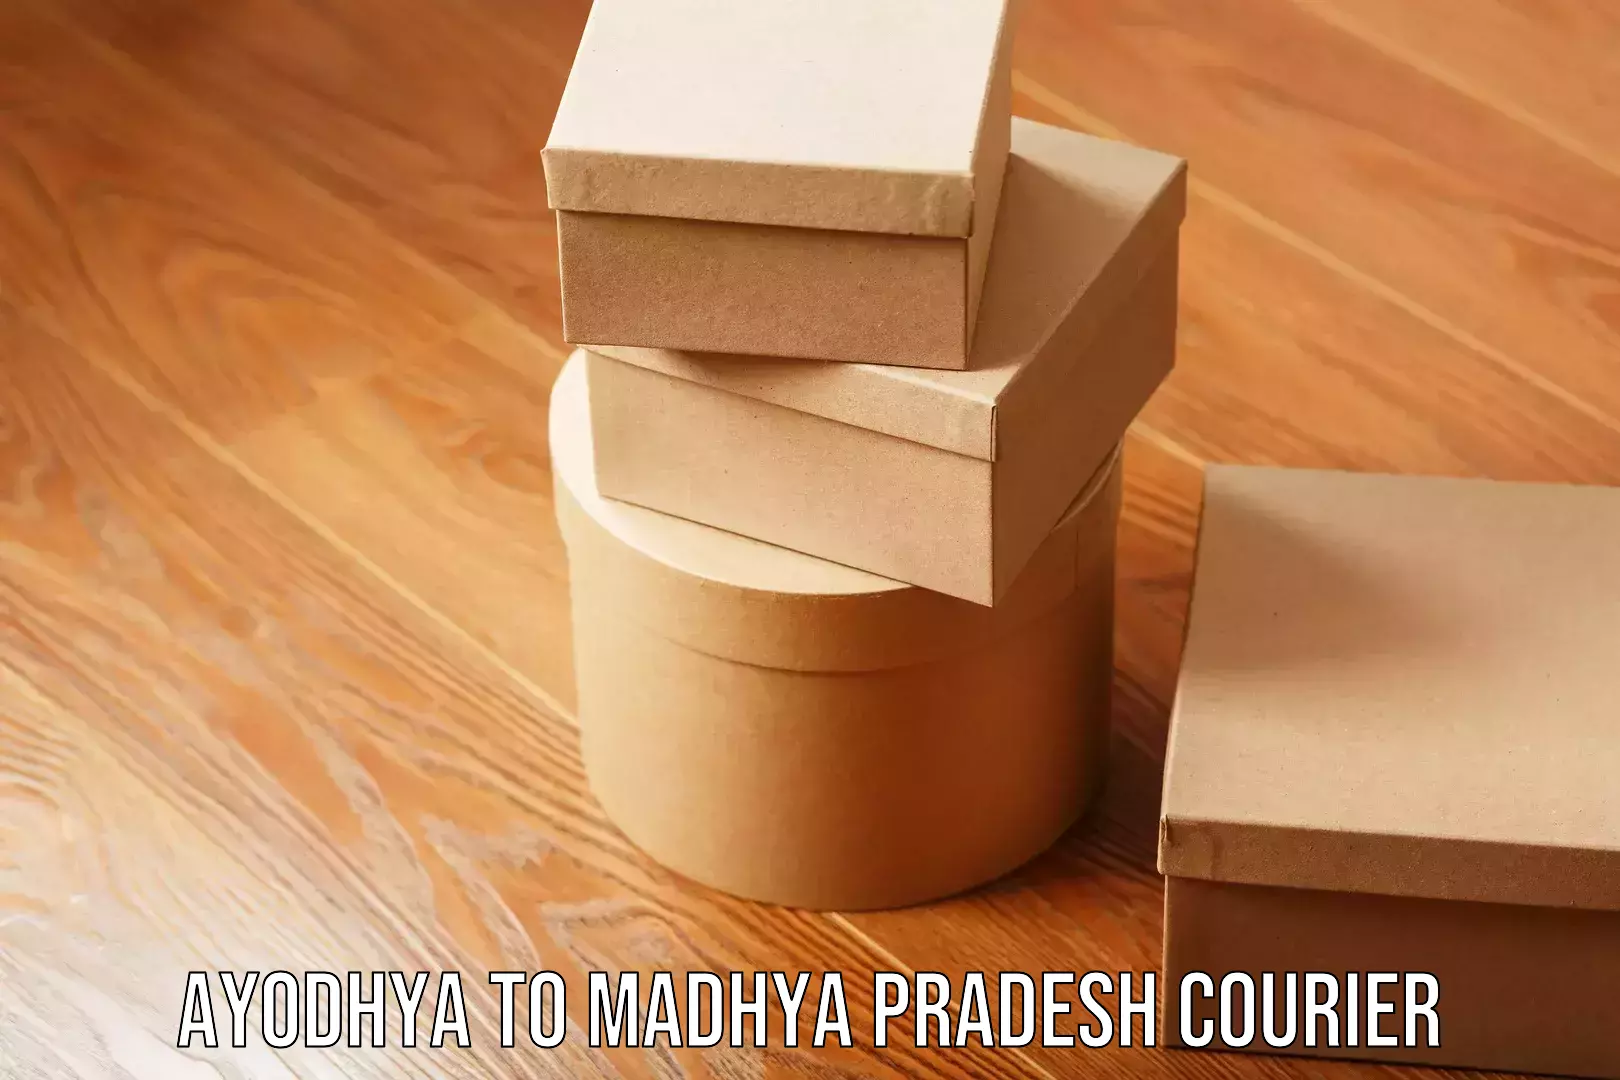 Package delivery network Ayodhya to Madhya Pradesh